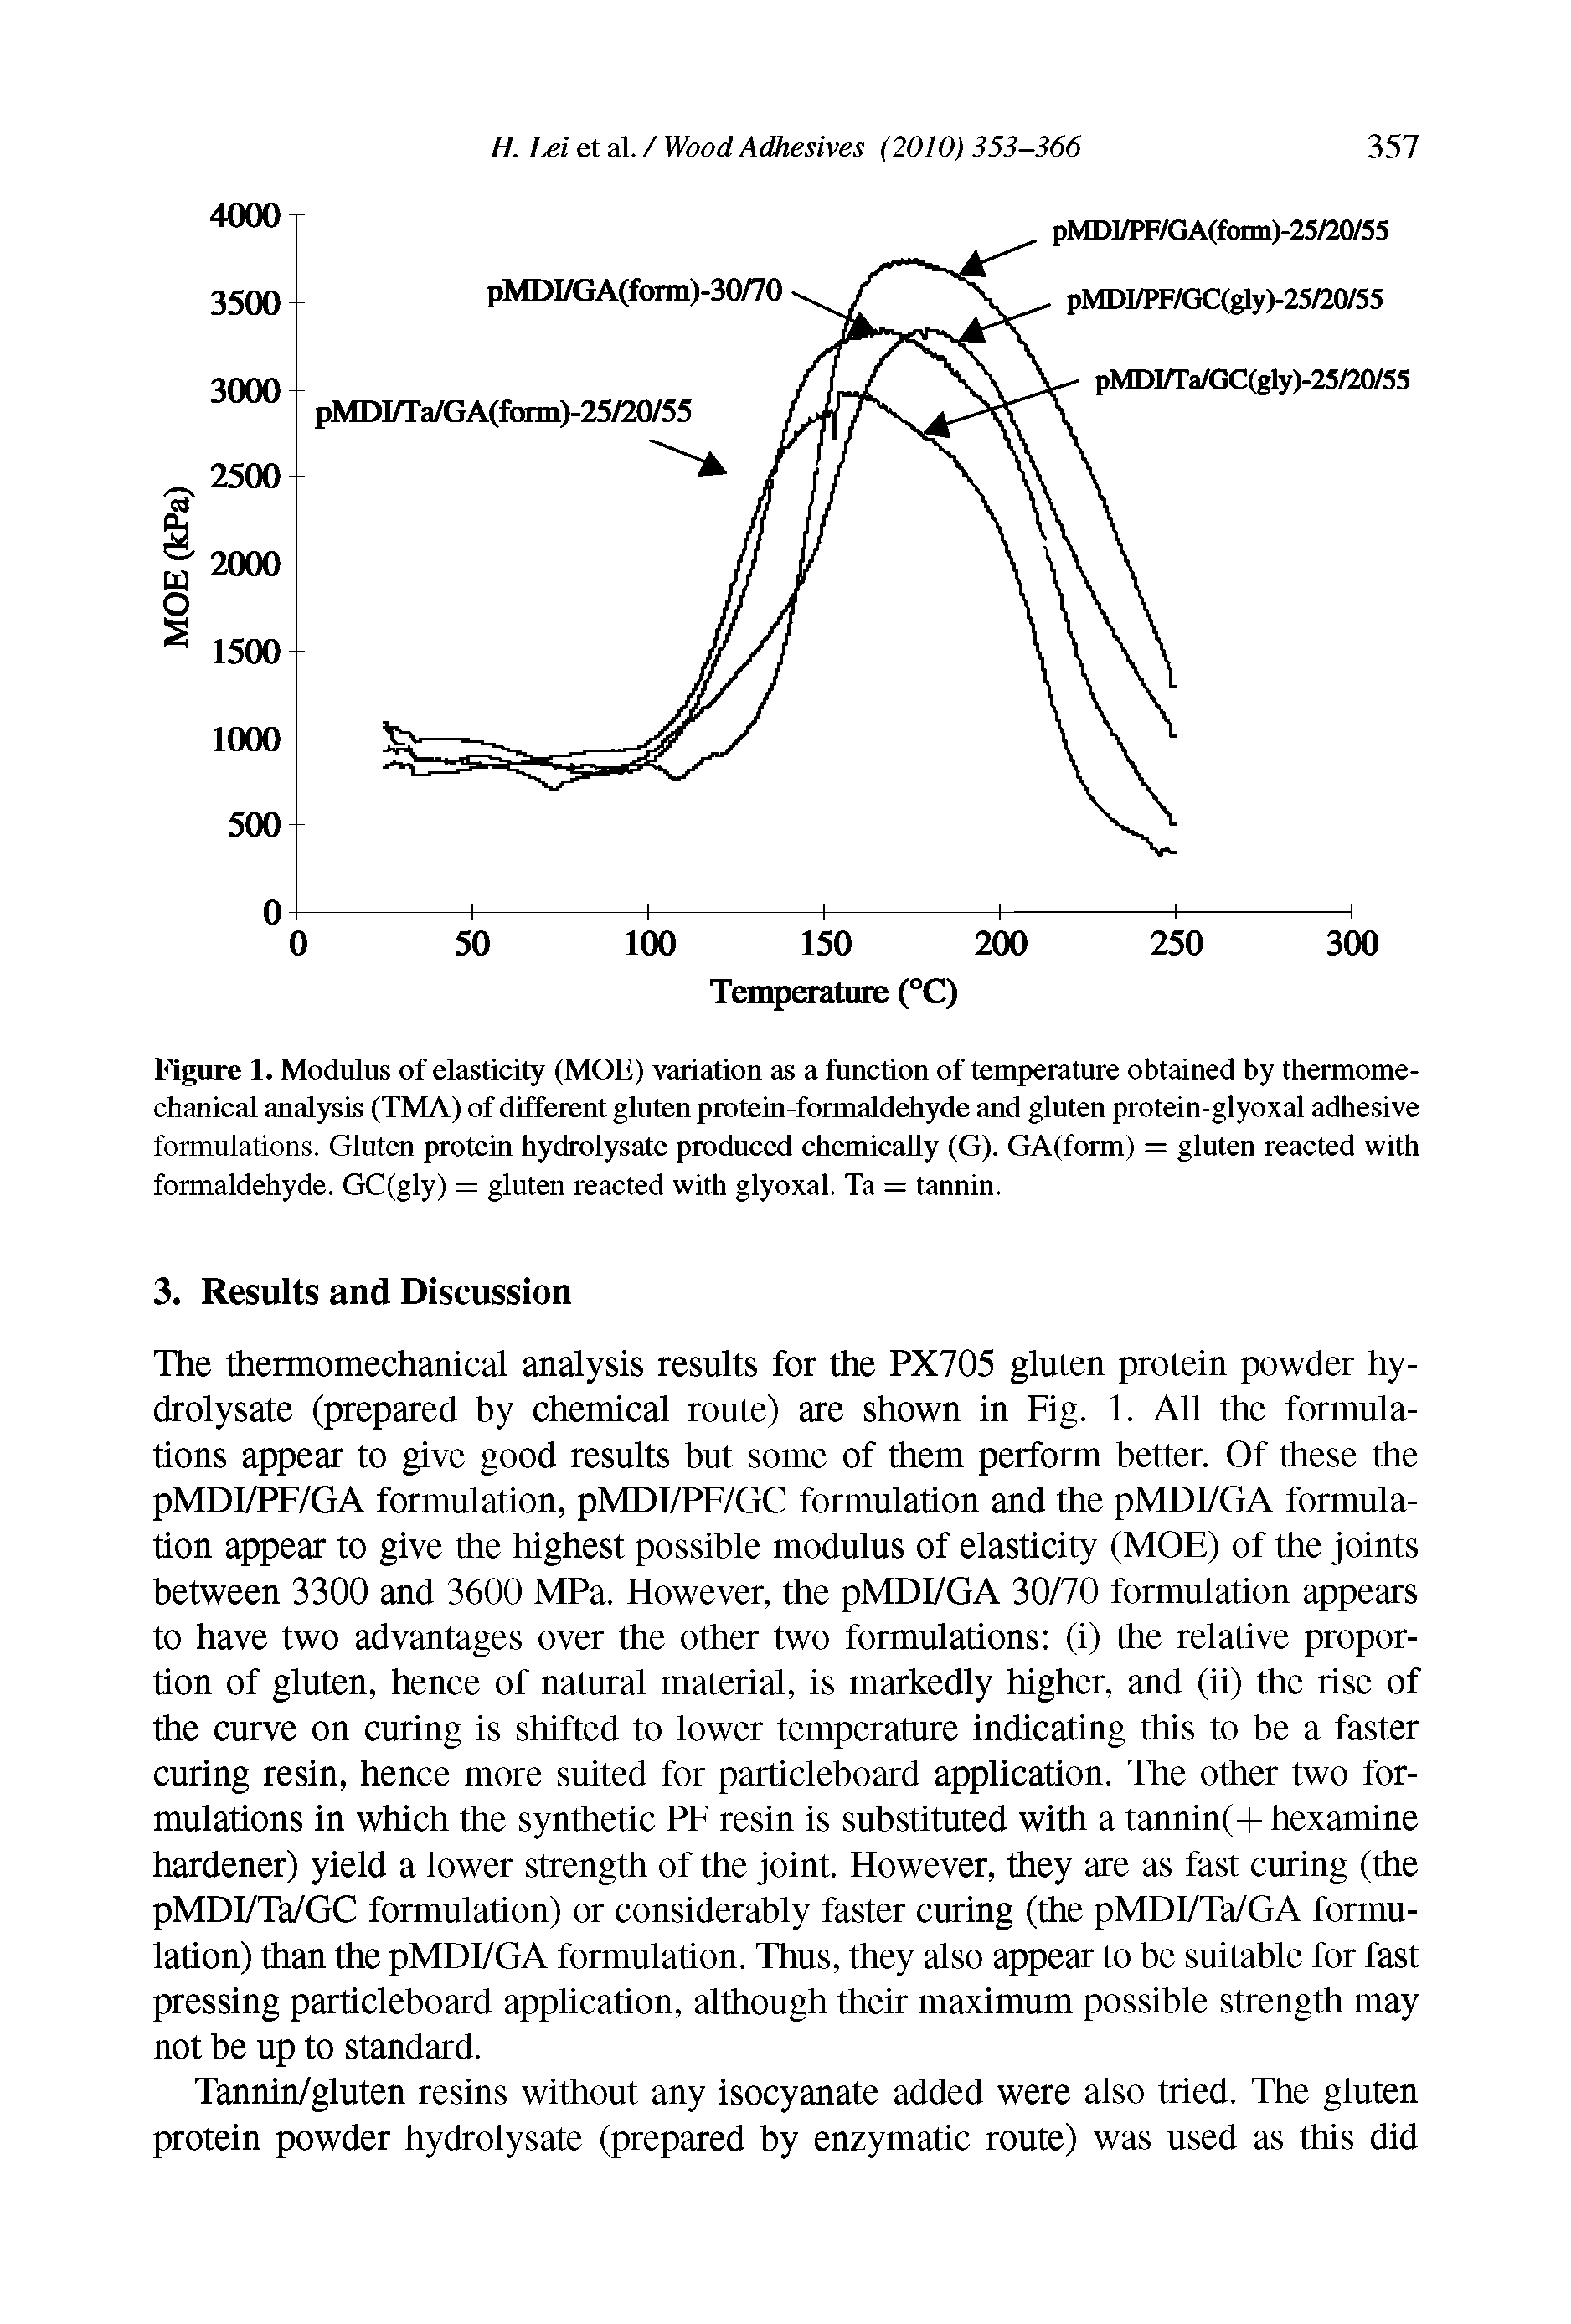 Figure 1. Modulus of elasticity (MOE) variation as a function of temperature obtained by thermomechanical analysis (TMA) of different gluten protein-formaldehyde and gluten protein-glyoxal adhesive formulations. Gluten protein hydrolysate produced chemically (G). GA(form) = gluten reacted with...